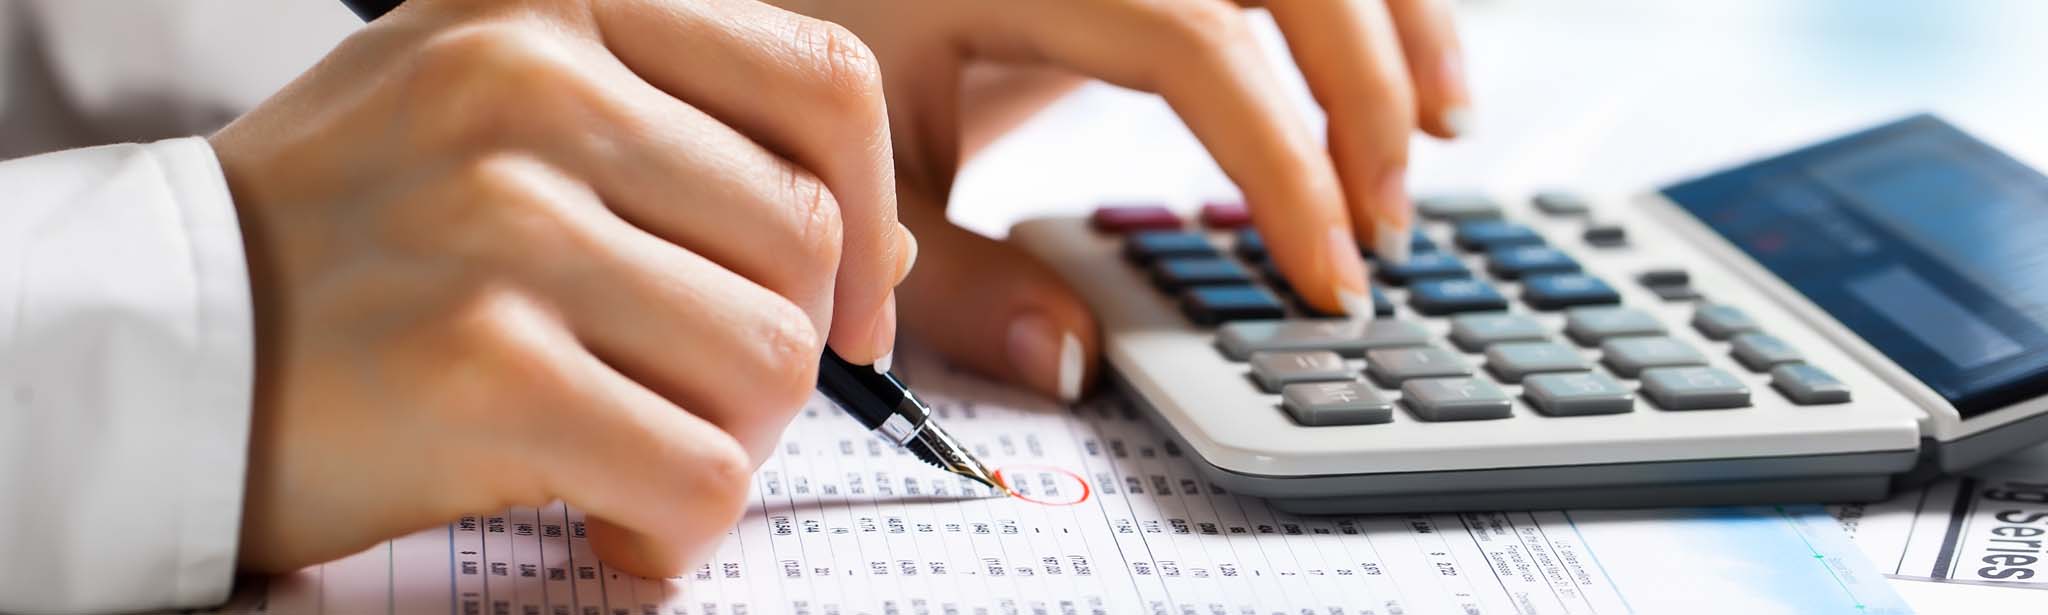 Accounting Training Course in Nepal - Skill Training Nepal